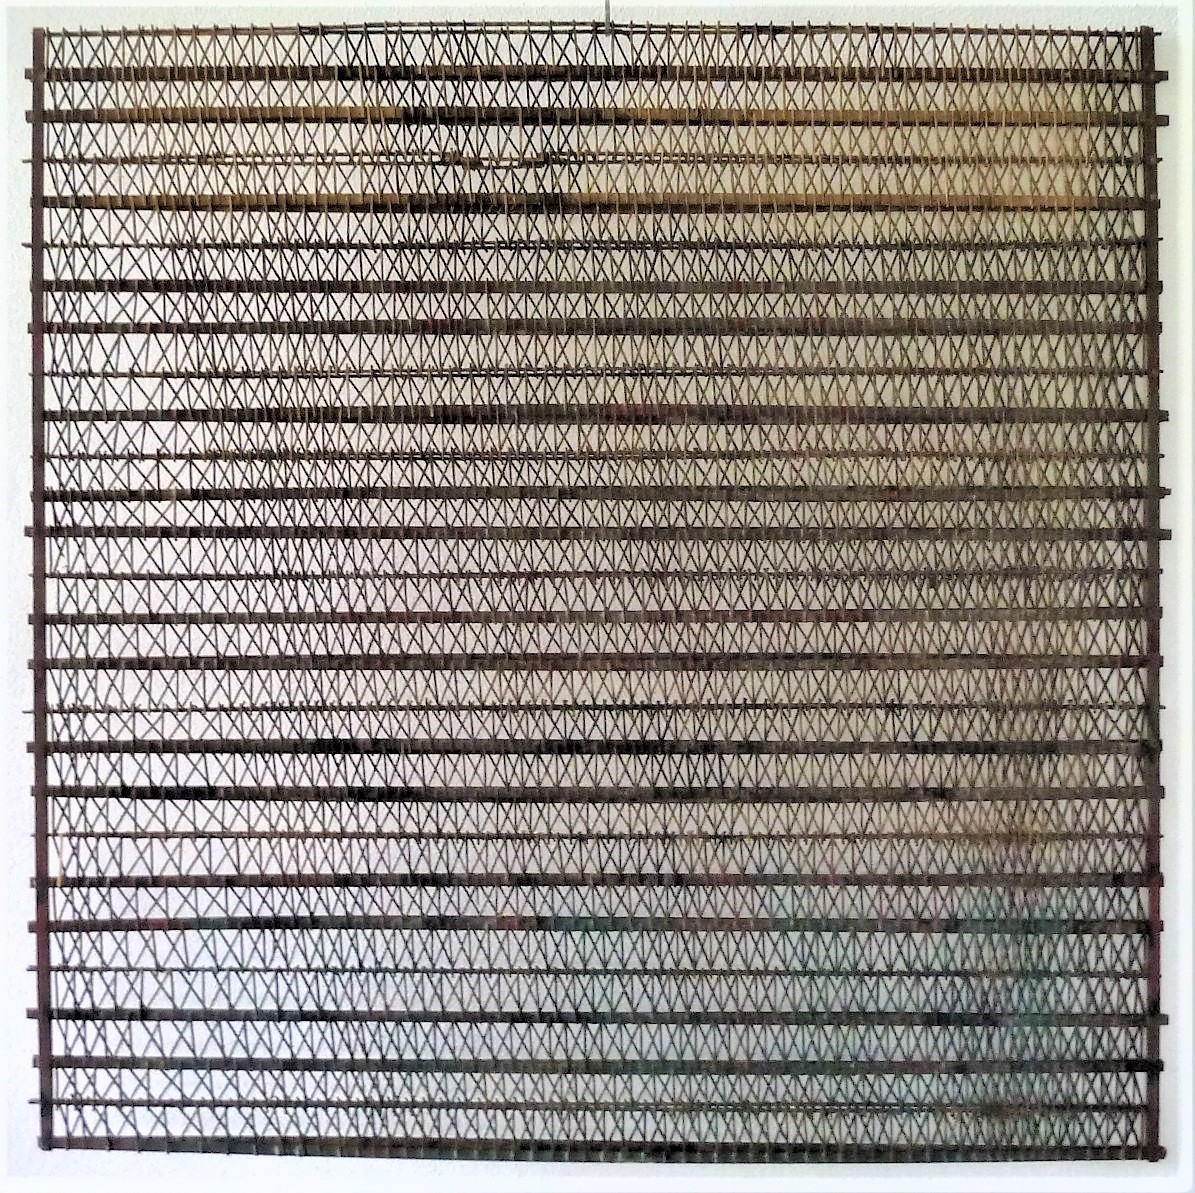 Grille, 1974, Painted wood, 100x100cm